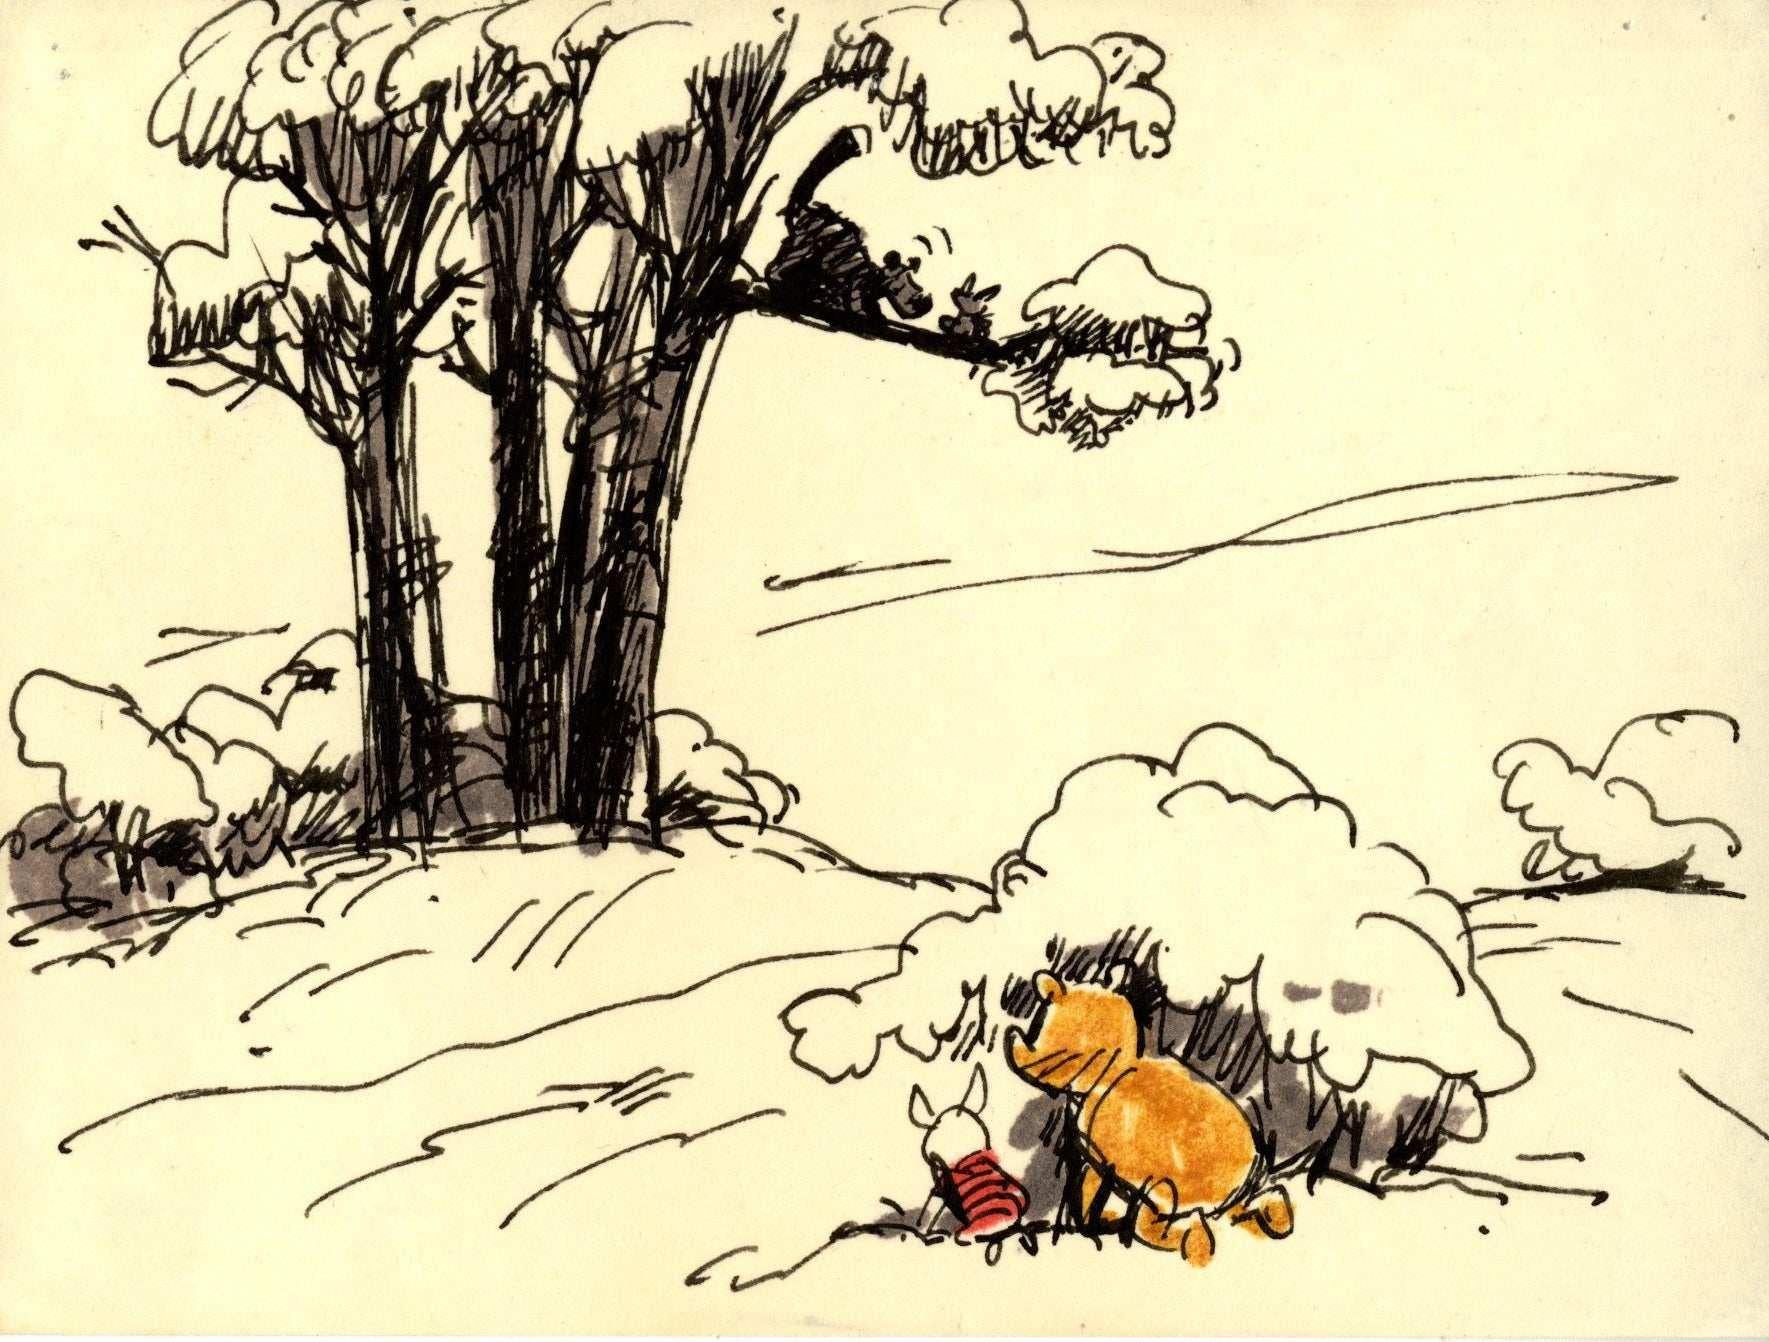 Winnie the Pooh and Tigger Too, Original Storyboard: Pooh and Piglet - Art by Walt Disney Studio Artists